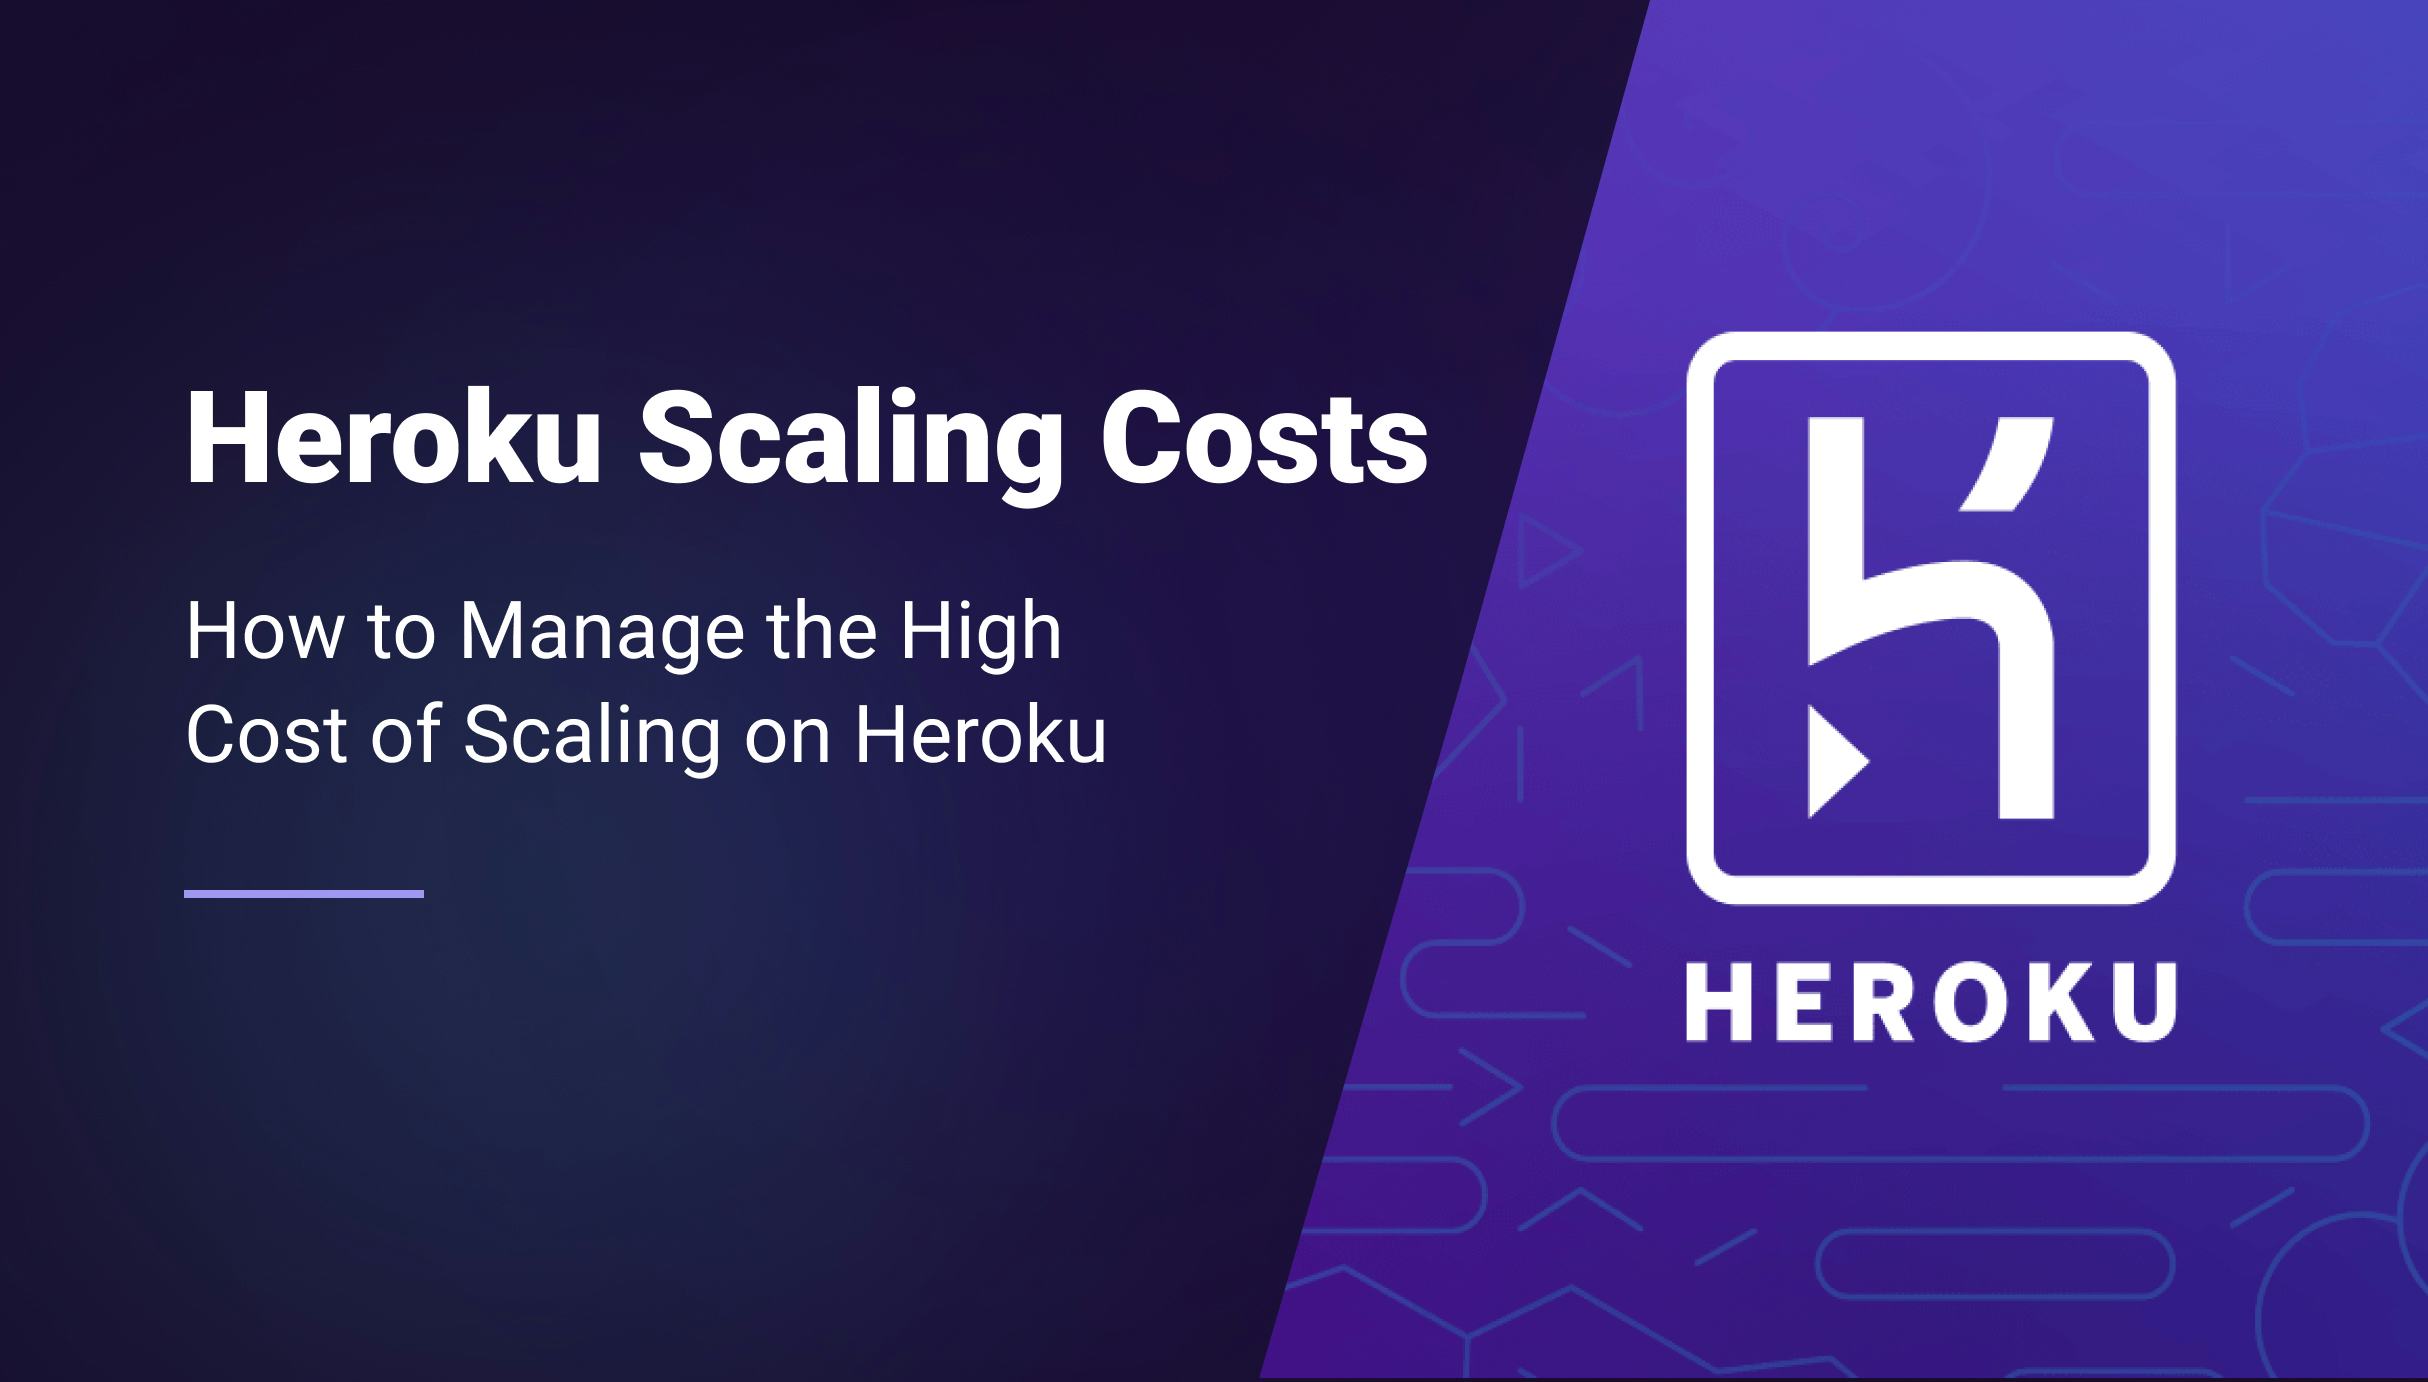 How to Manage the High Cost of Scaling on Heroku - Qovery